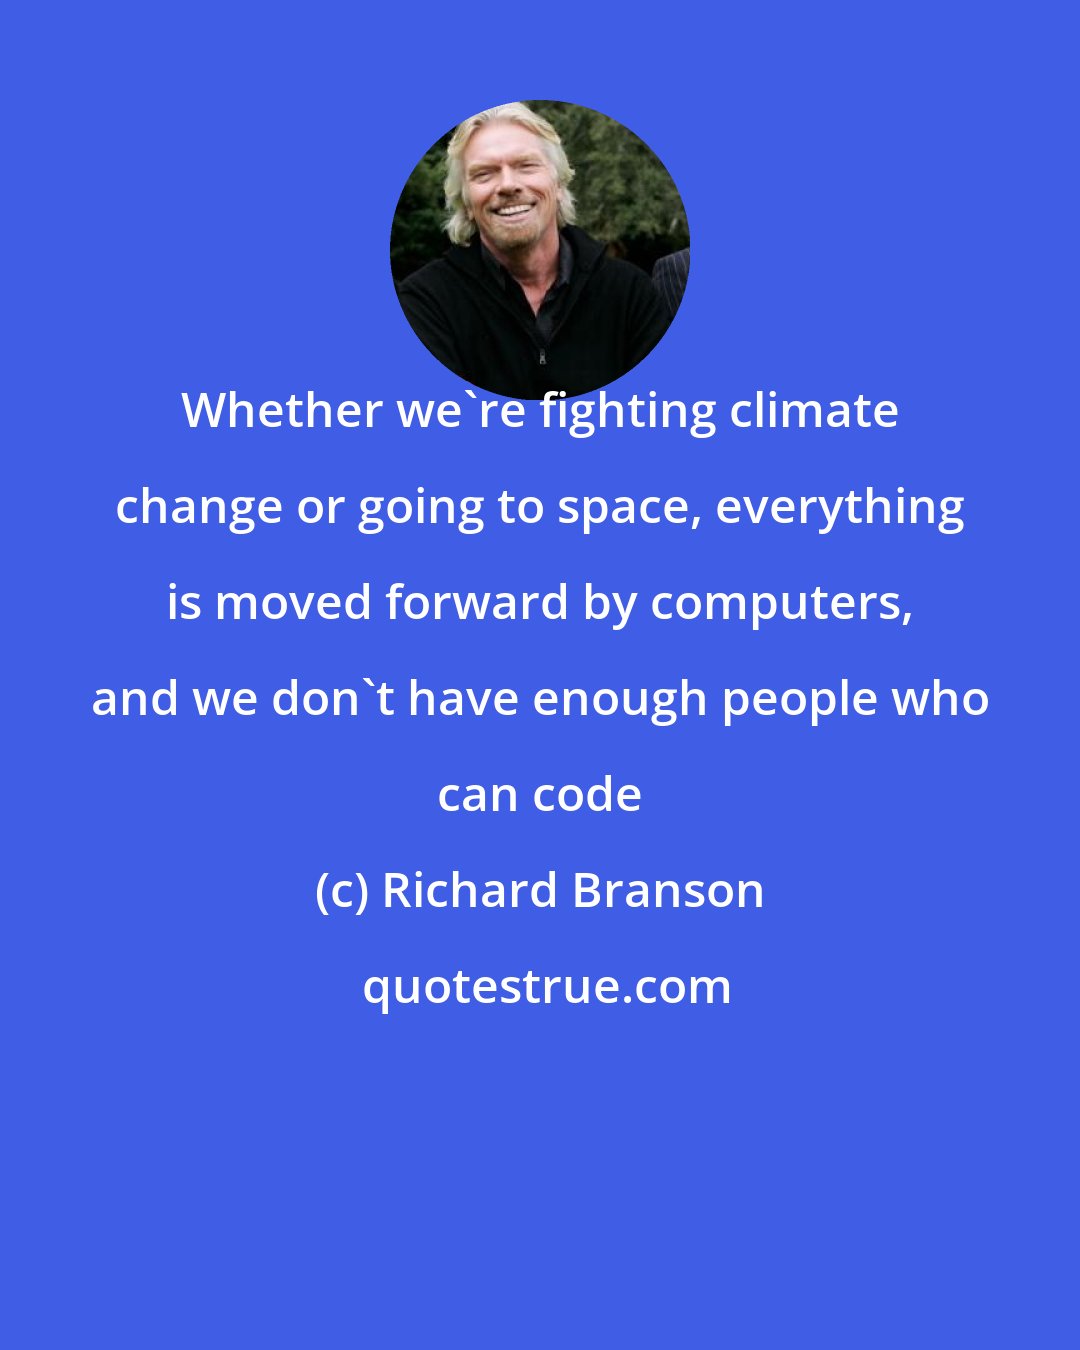 Richard Branson: Whether we're fighting climate change or going to space, everything is moved forward by computers, and we don't have enough people who can code